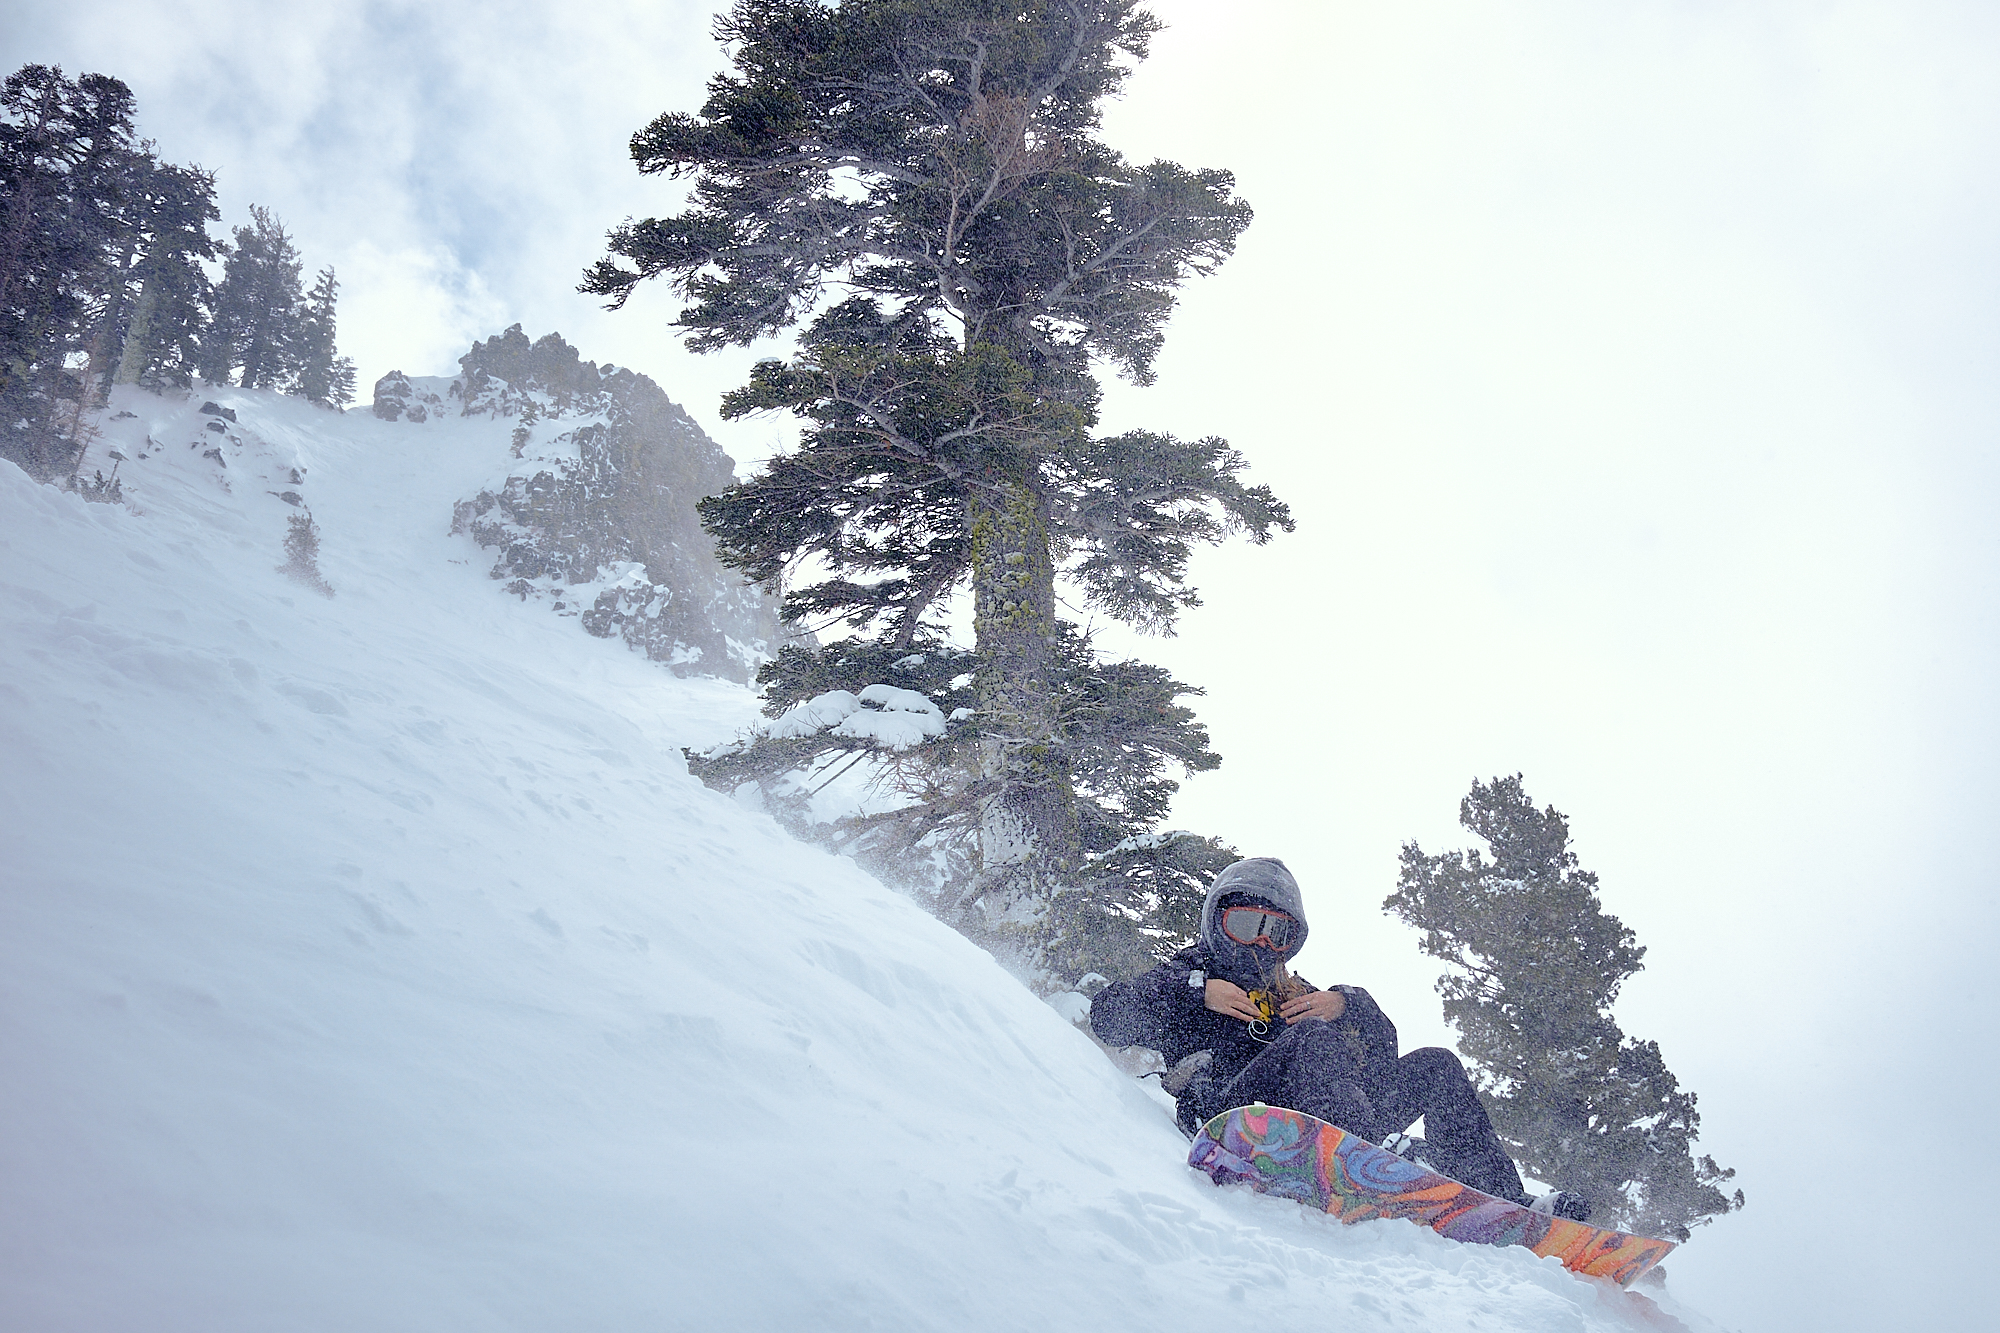  Morgan and I went out during a break in the storm, but still ended up getting hit with the next wave. | Alpine Meadows, CA 3/28/19 